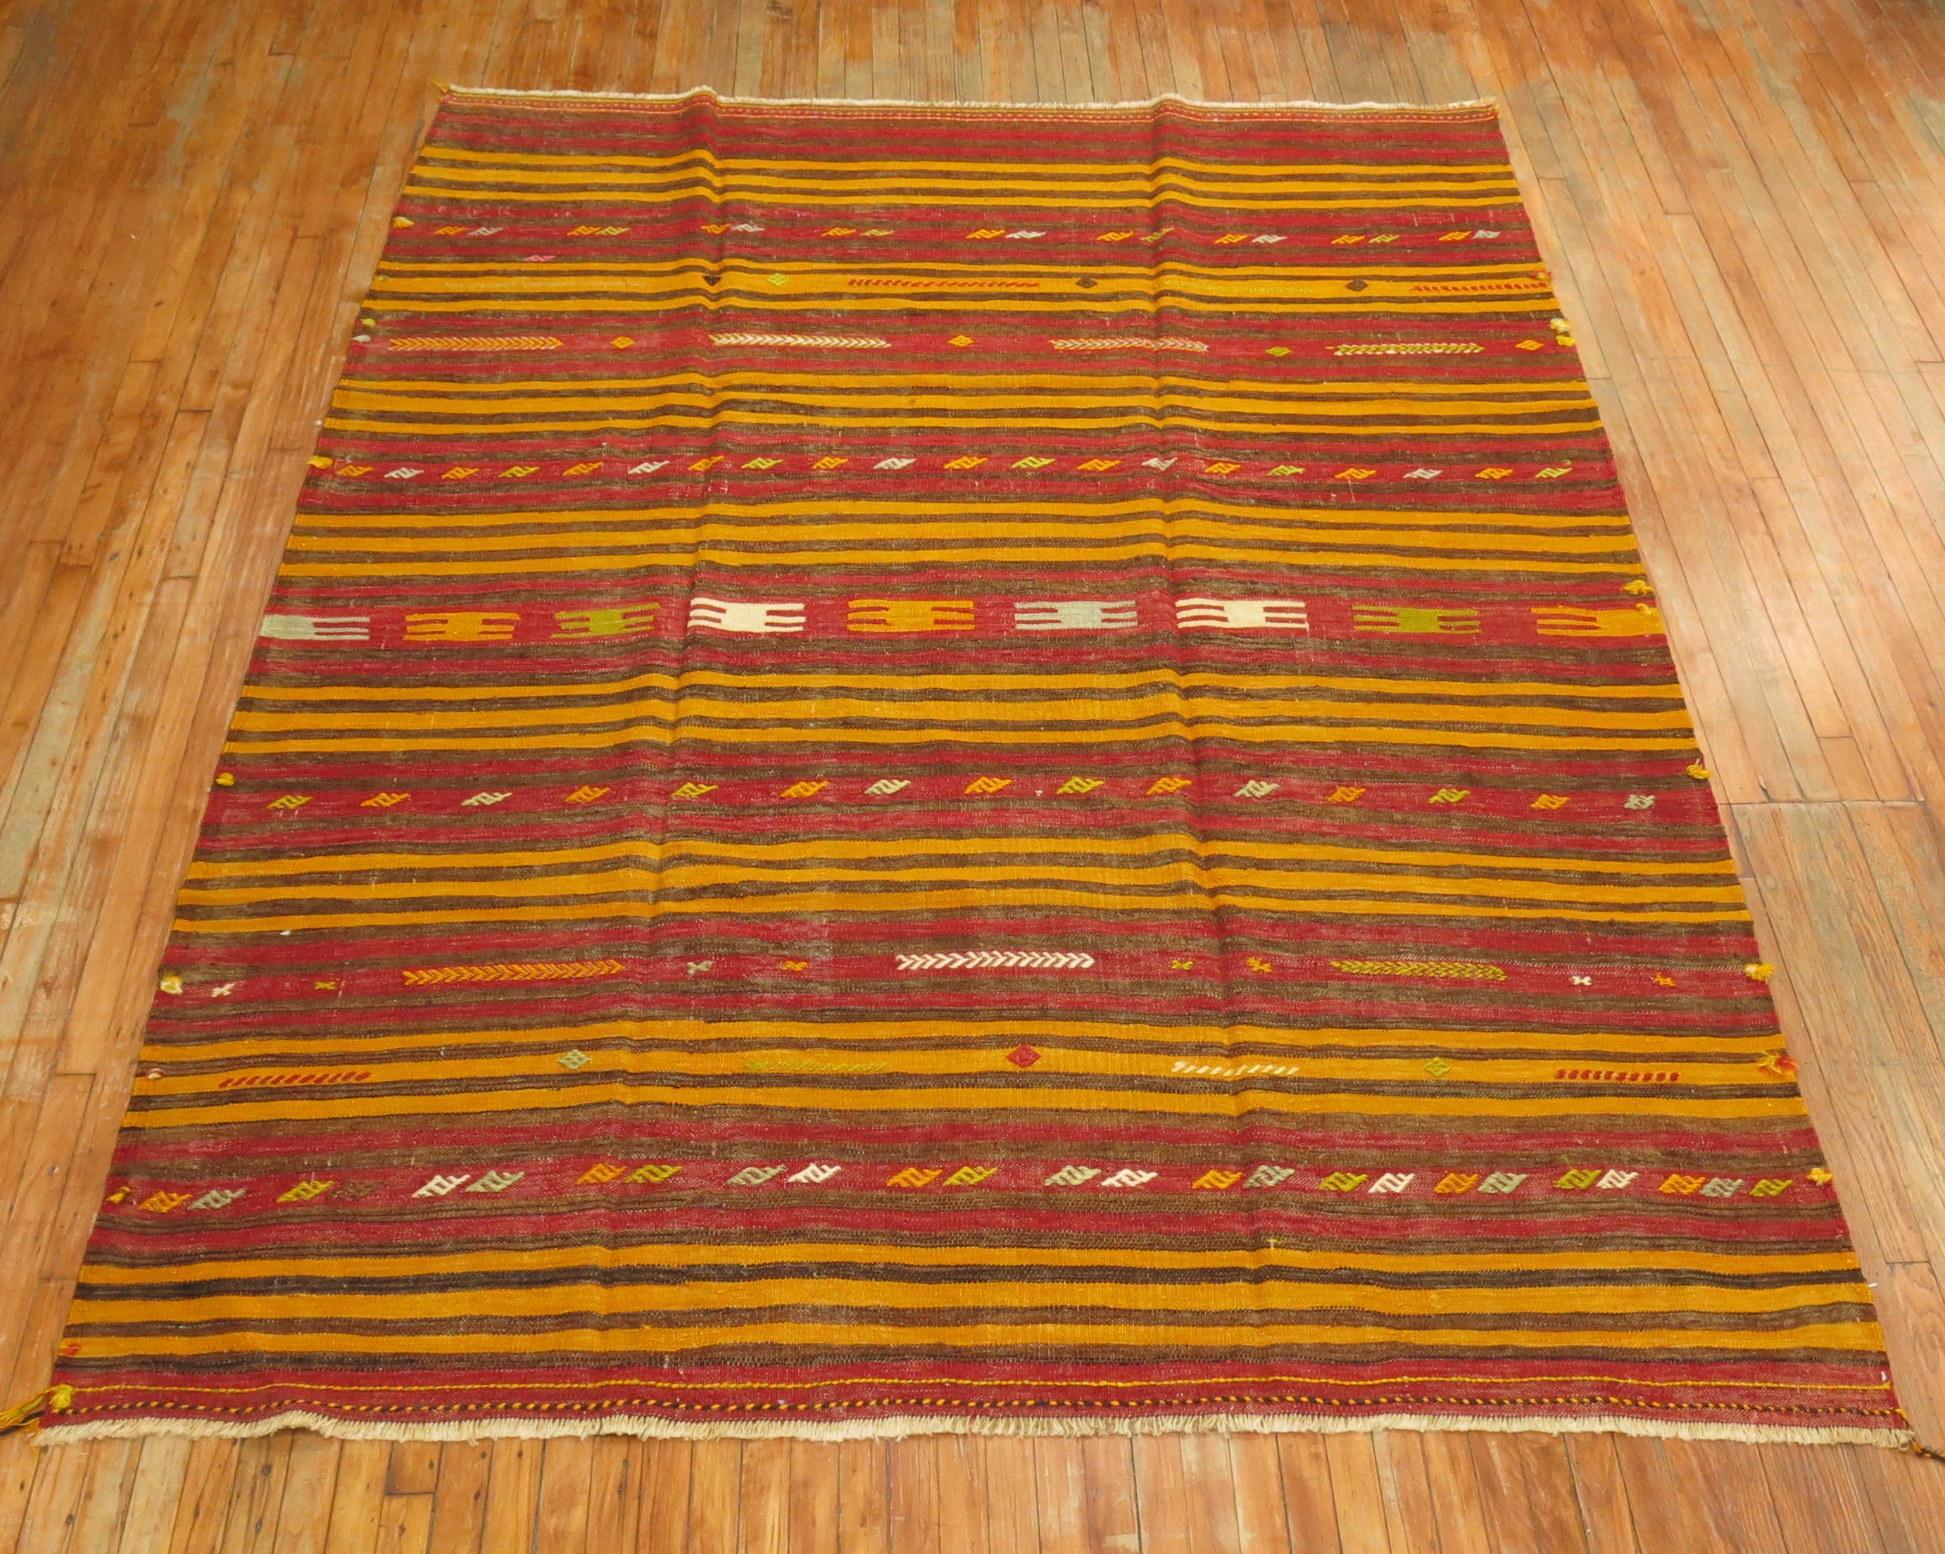 An intermediate size midcentury handwoven striped Turkish Kilim in red, orange, rust and brown accents. Has somewhat of a nomadic feel to it,

circa mid-20th century, measures: 7'4” x 9'8”.